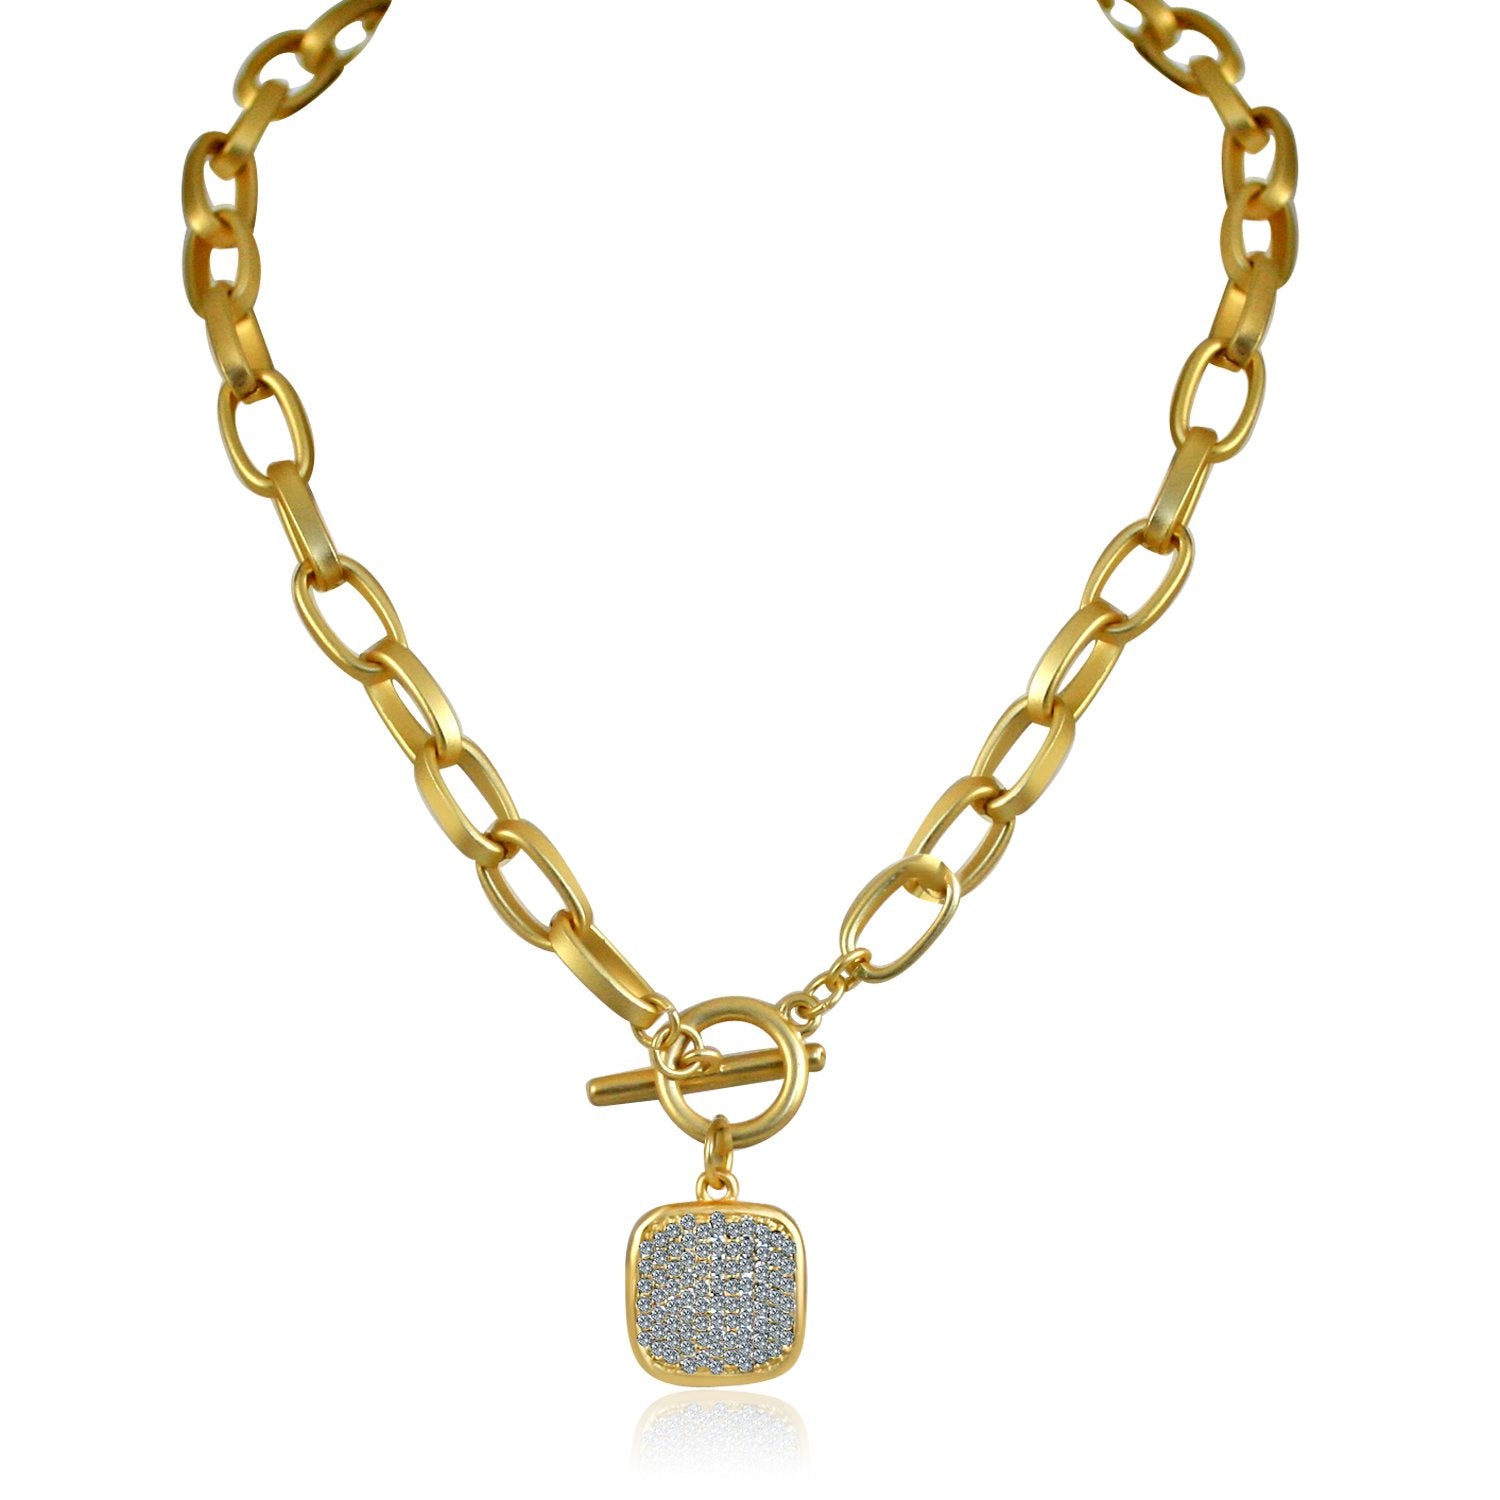 Sparkling Square Gold Pendant Paved with Cubic Zirconia Elongated Chain Link Toggle Clasp 689N791